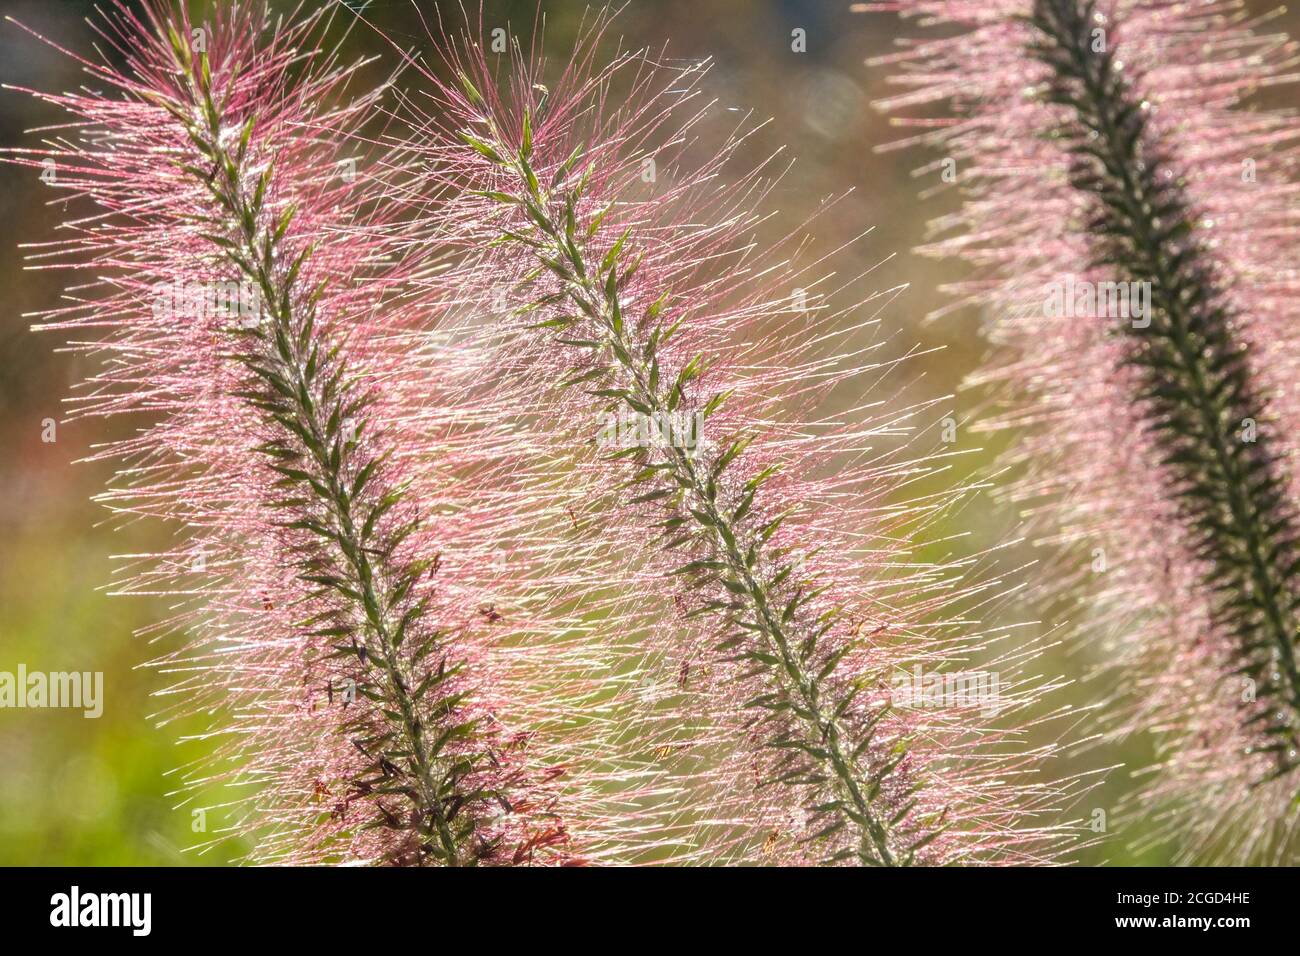 Fountain Grass Pennisetum flowers Hardy, Perennial, September, Plant, Herbaceous, Plants Pennisetum alopecuroides 'Red Head' Pennisetum 'Red Head' Stock Photo